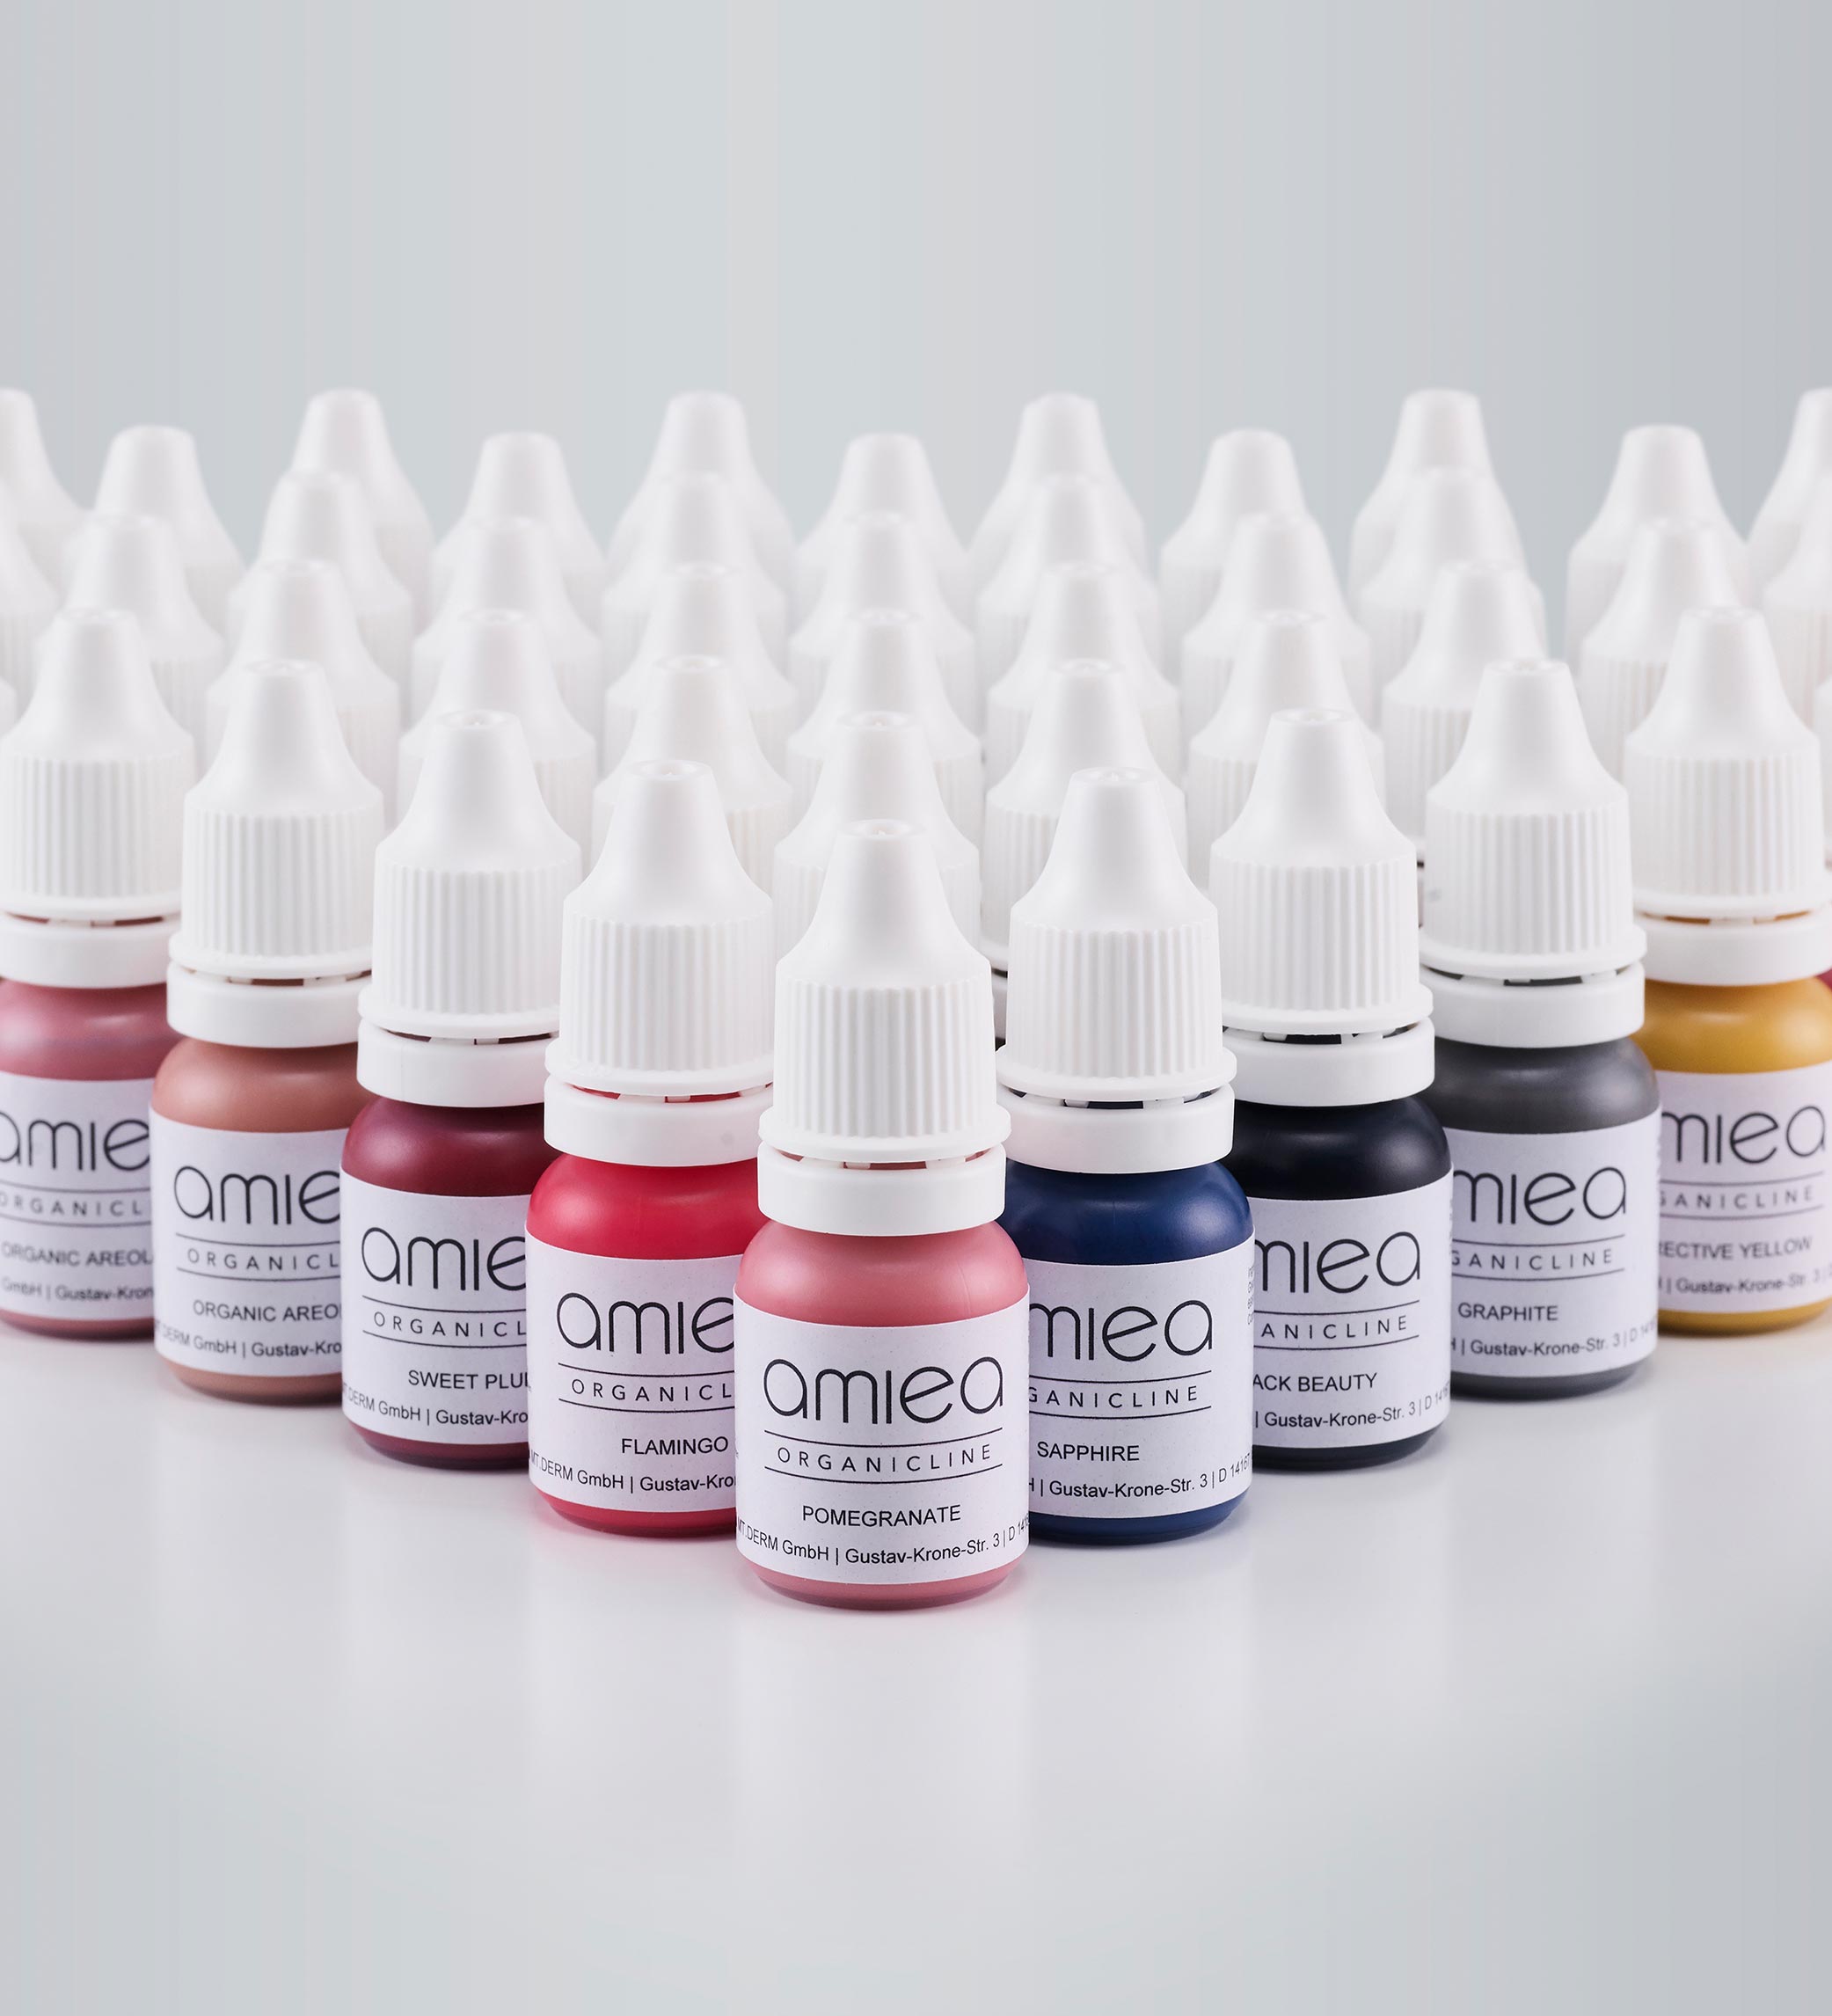 Bottles of amiea organicline colors on grey background